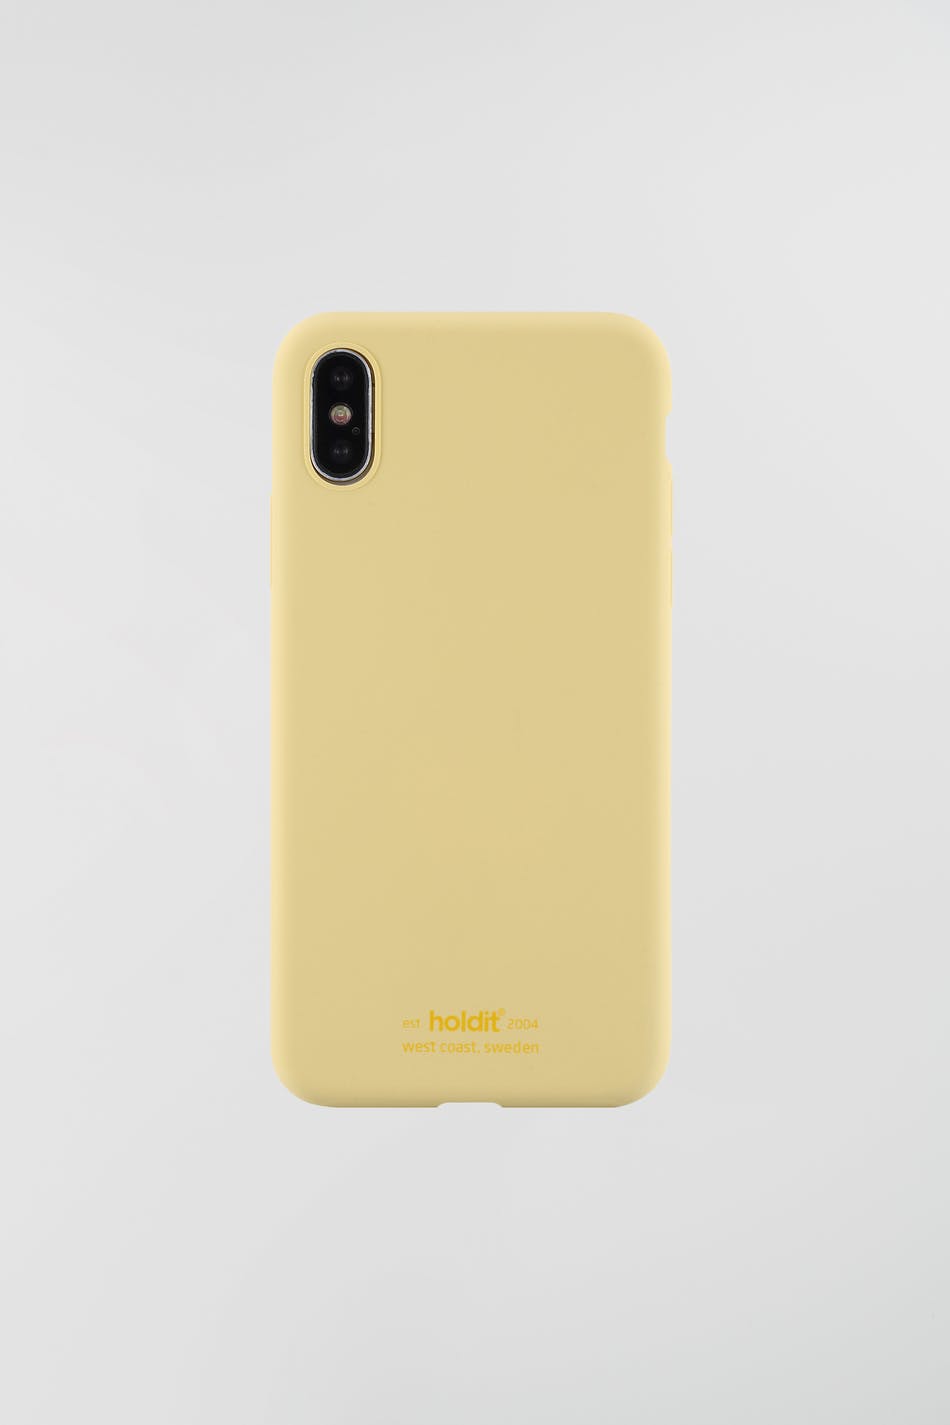 Holdit iphone X/XS silicone case